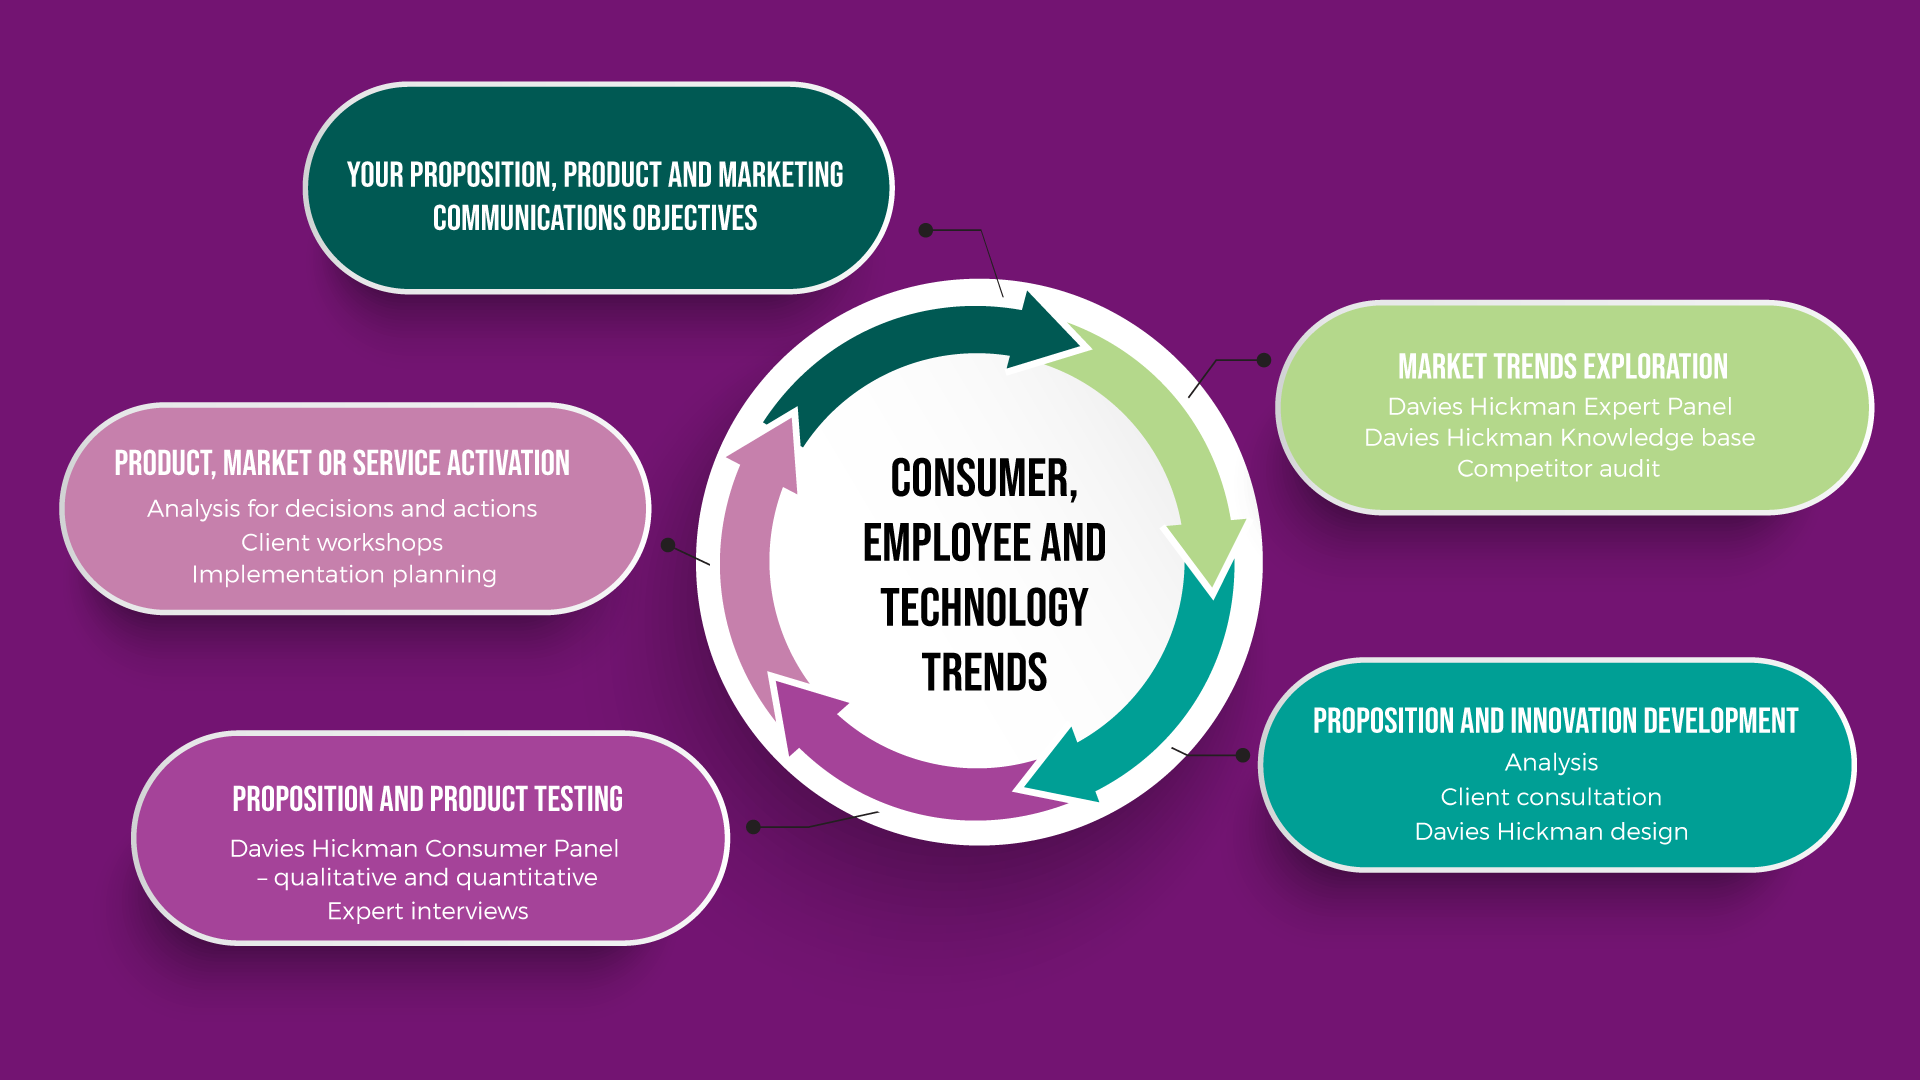 Consumer, employee and technology trends